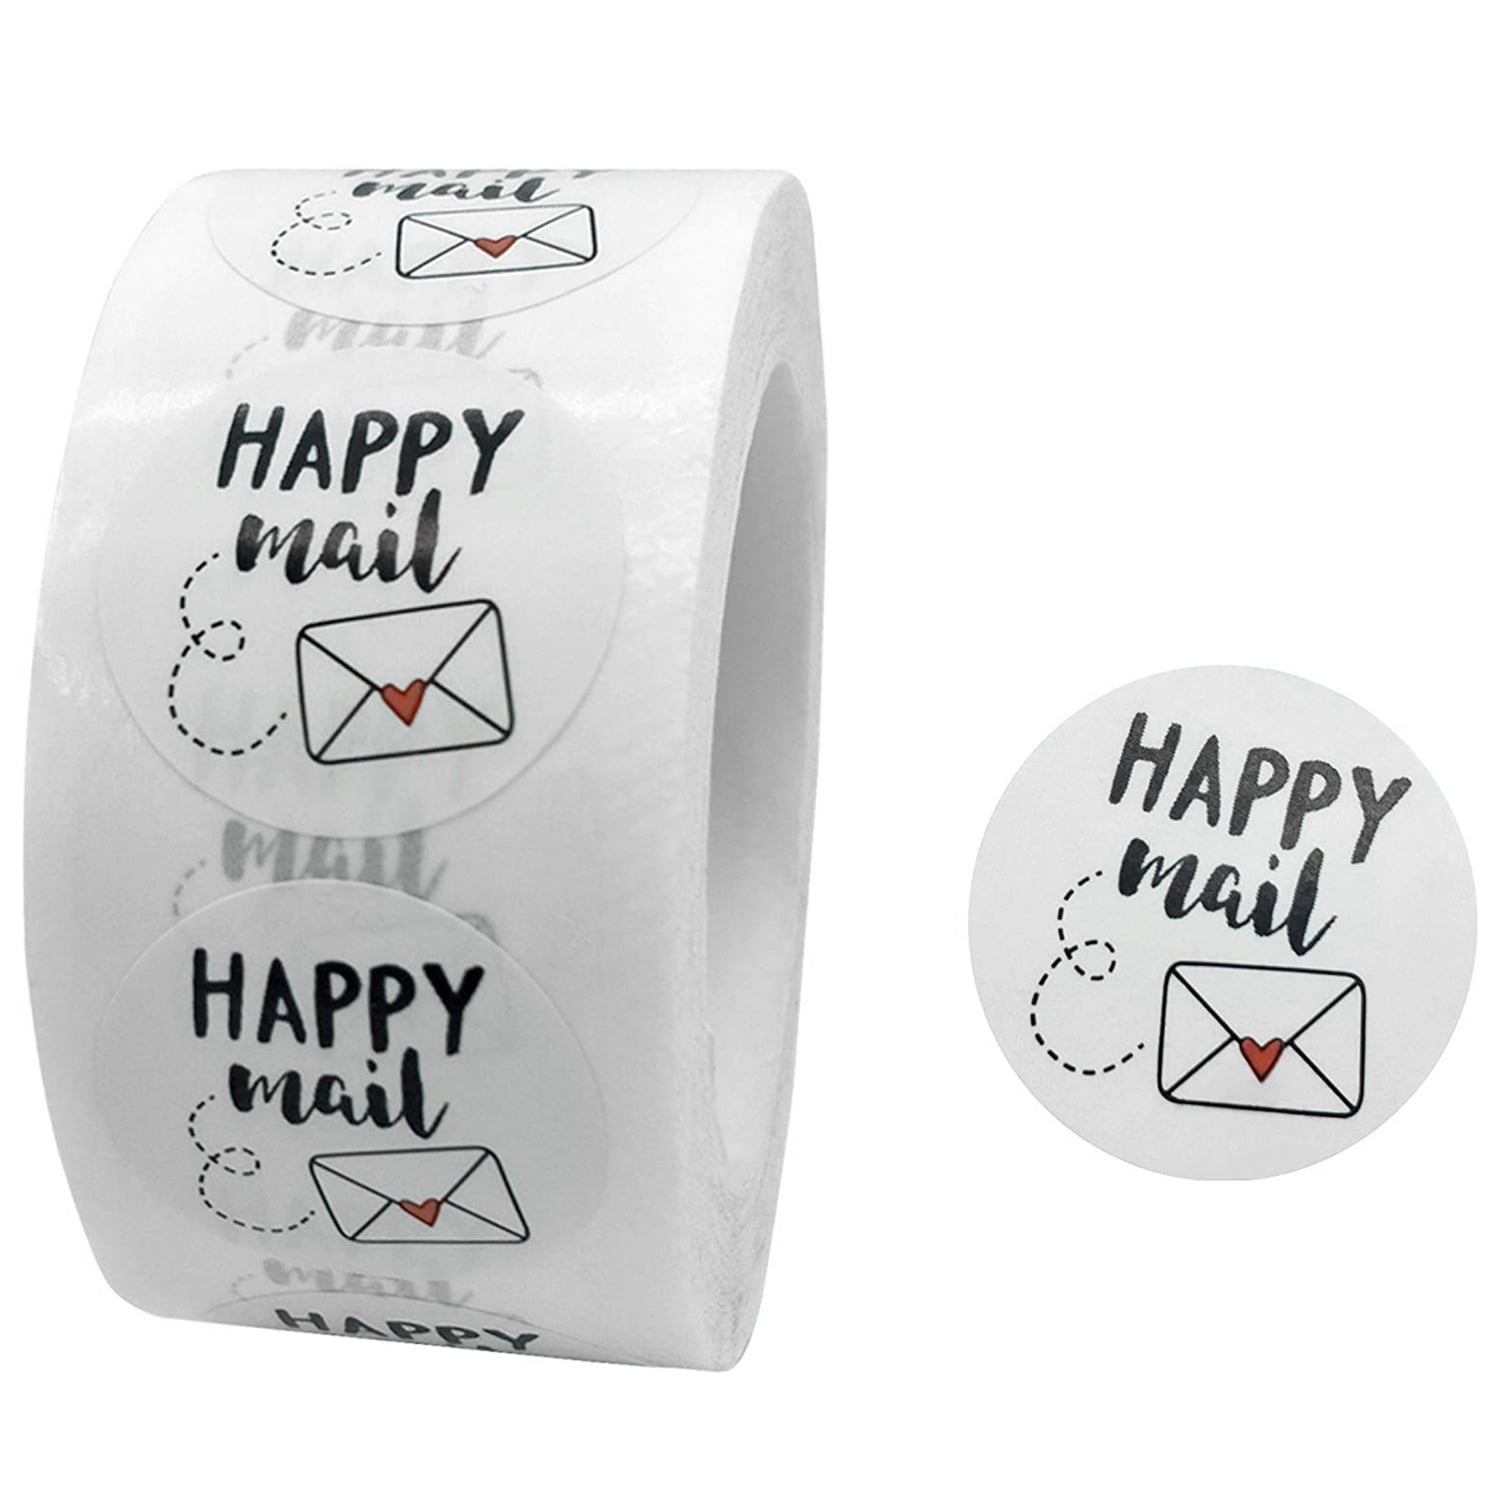 Rainbow Happy Mail Stickers Have A Nice Day Best Wishes Label,2 Inch Adhesive Cute Stickers for Envelope Seals,Gift Tags,500 Per Pack. 